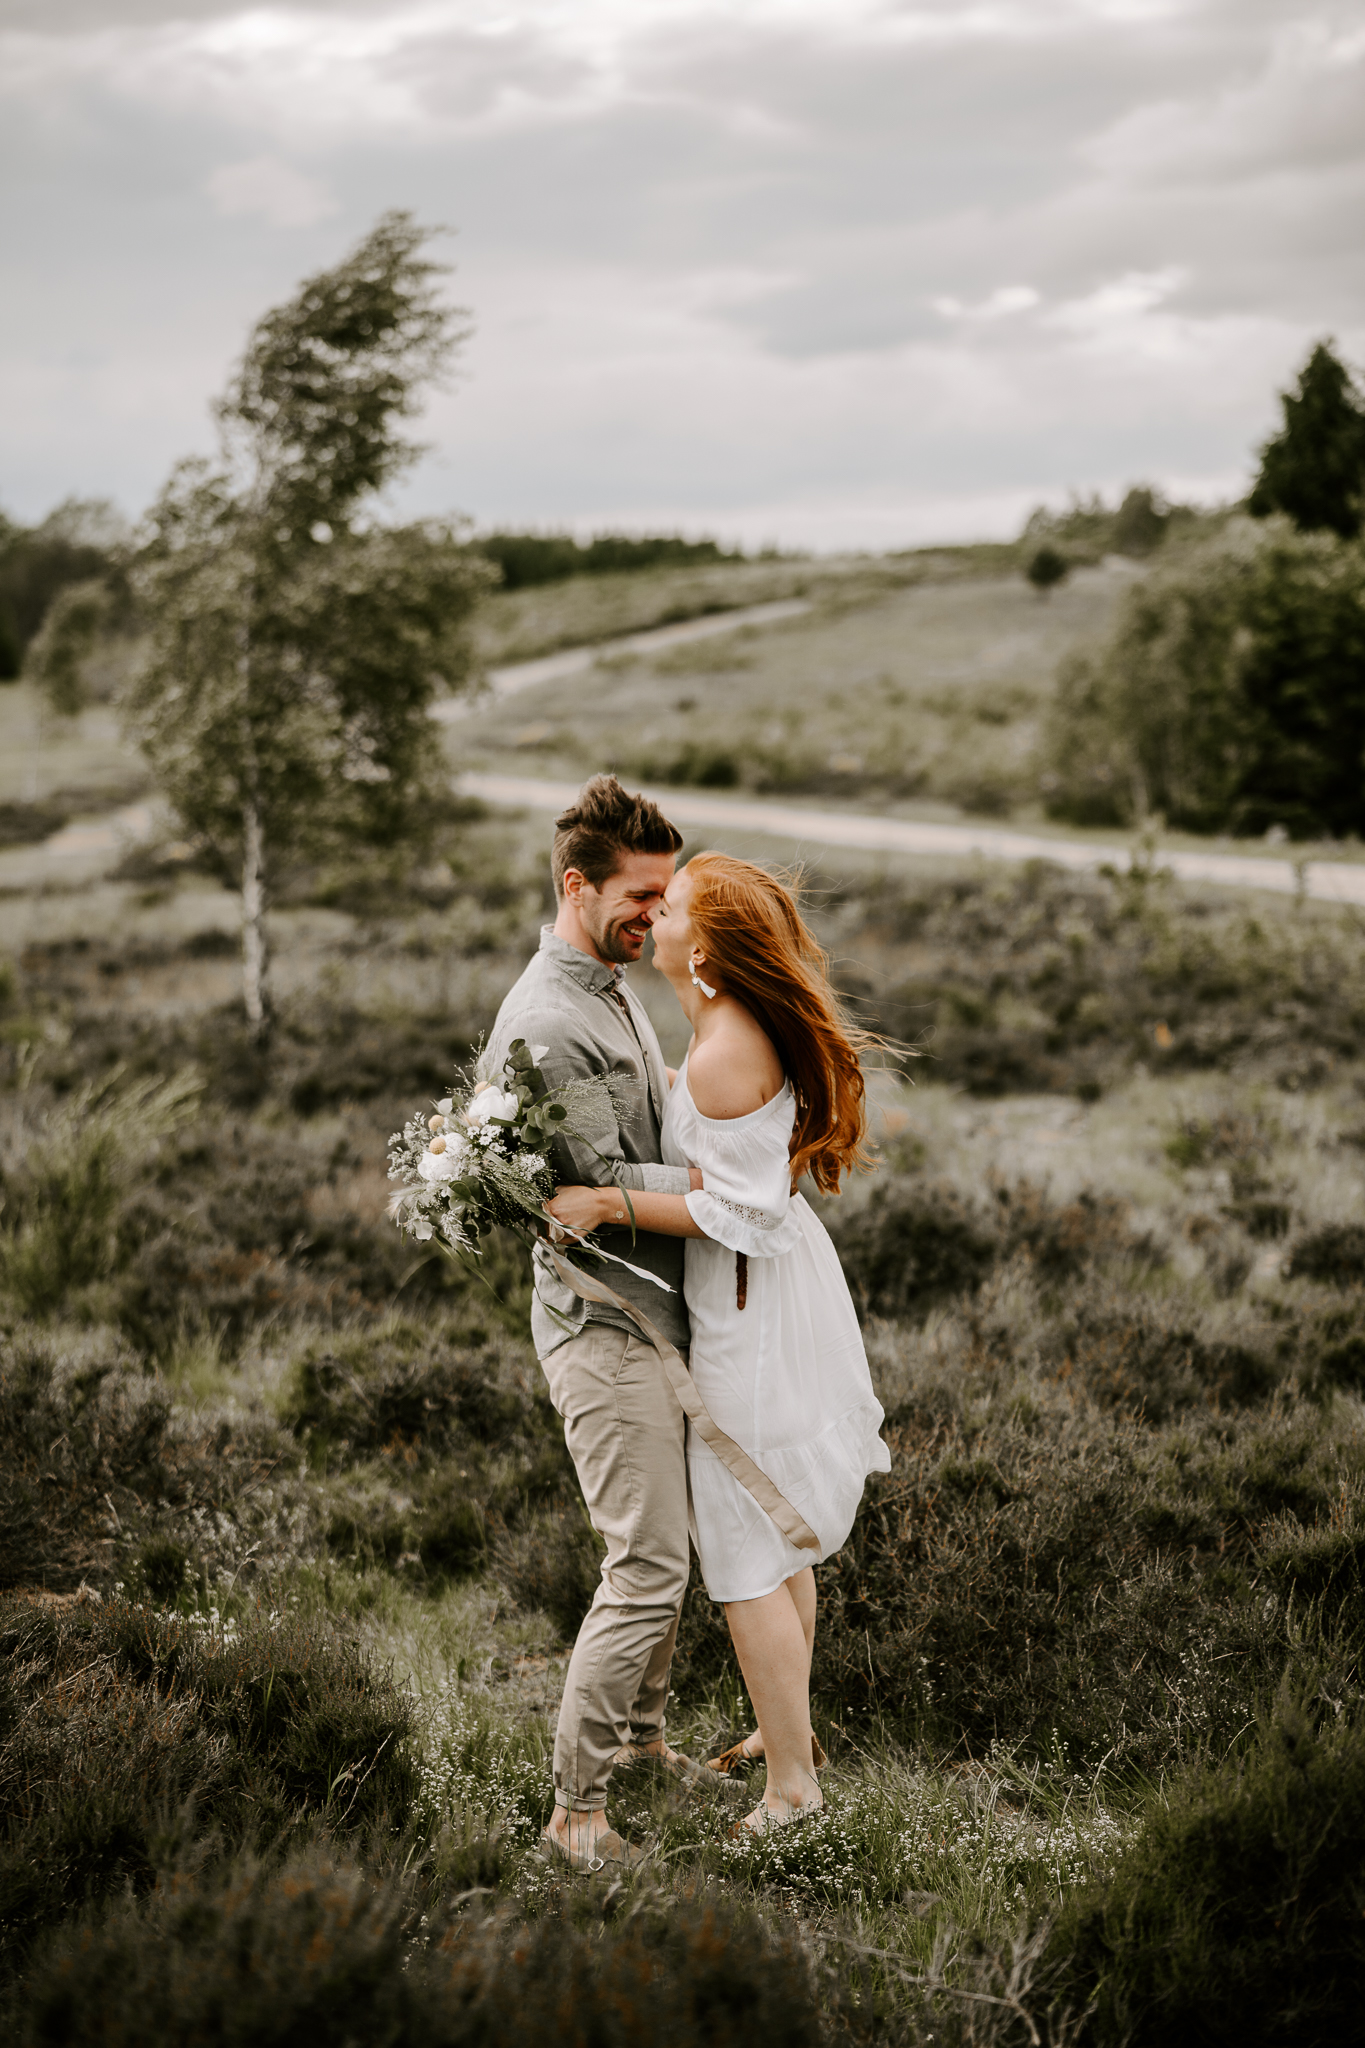 Engagement Shooting with a flock of sheep and goats by Brigitte Foysi